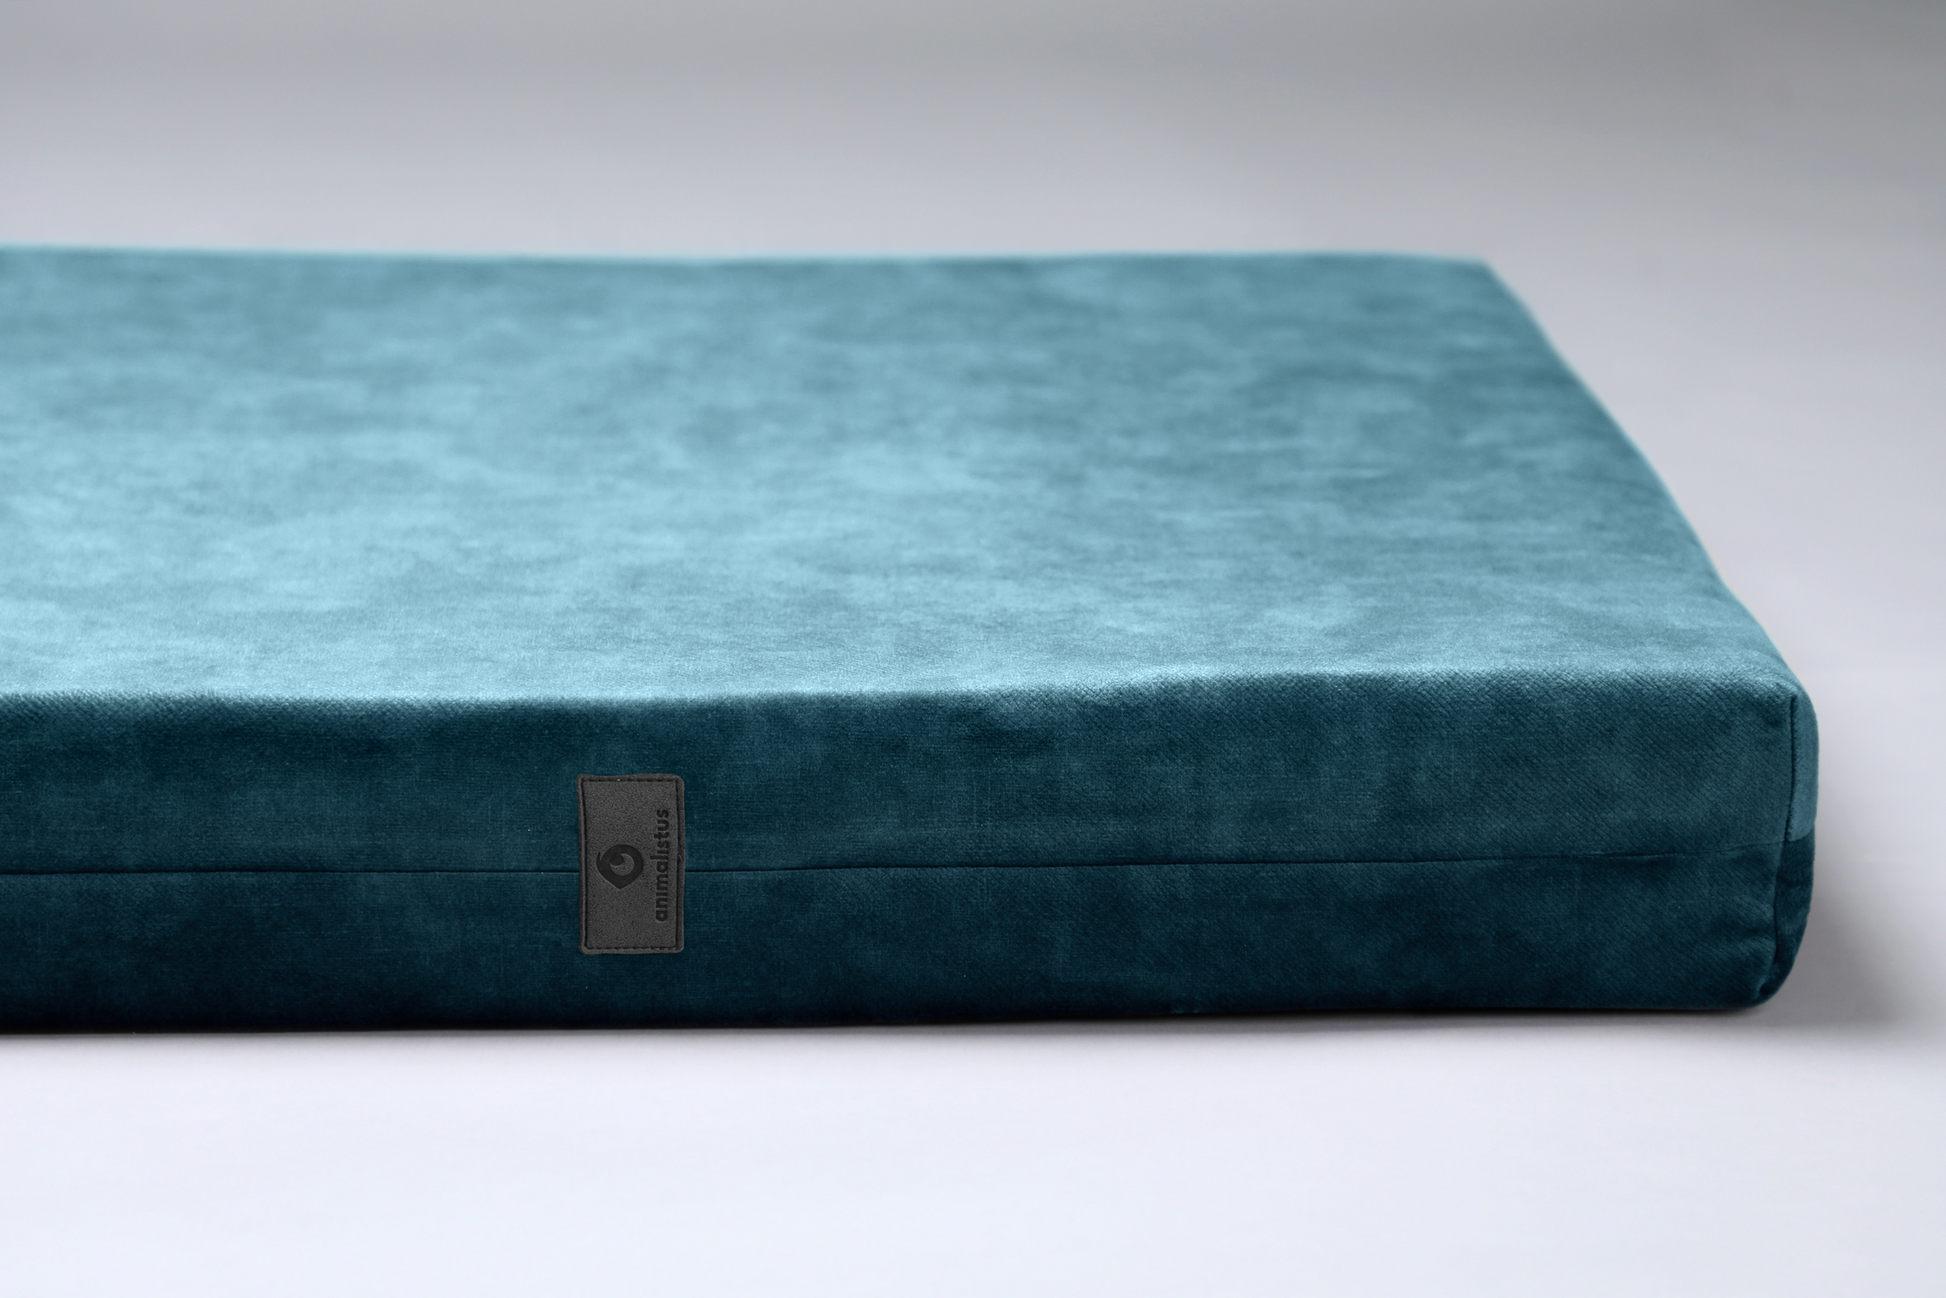 Dog's own bedroom bed | Extra comfort & support | 2-sided | OCEAN BLUE